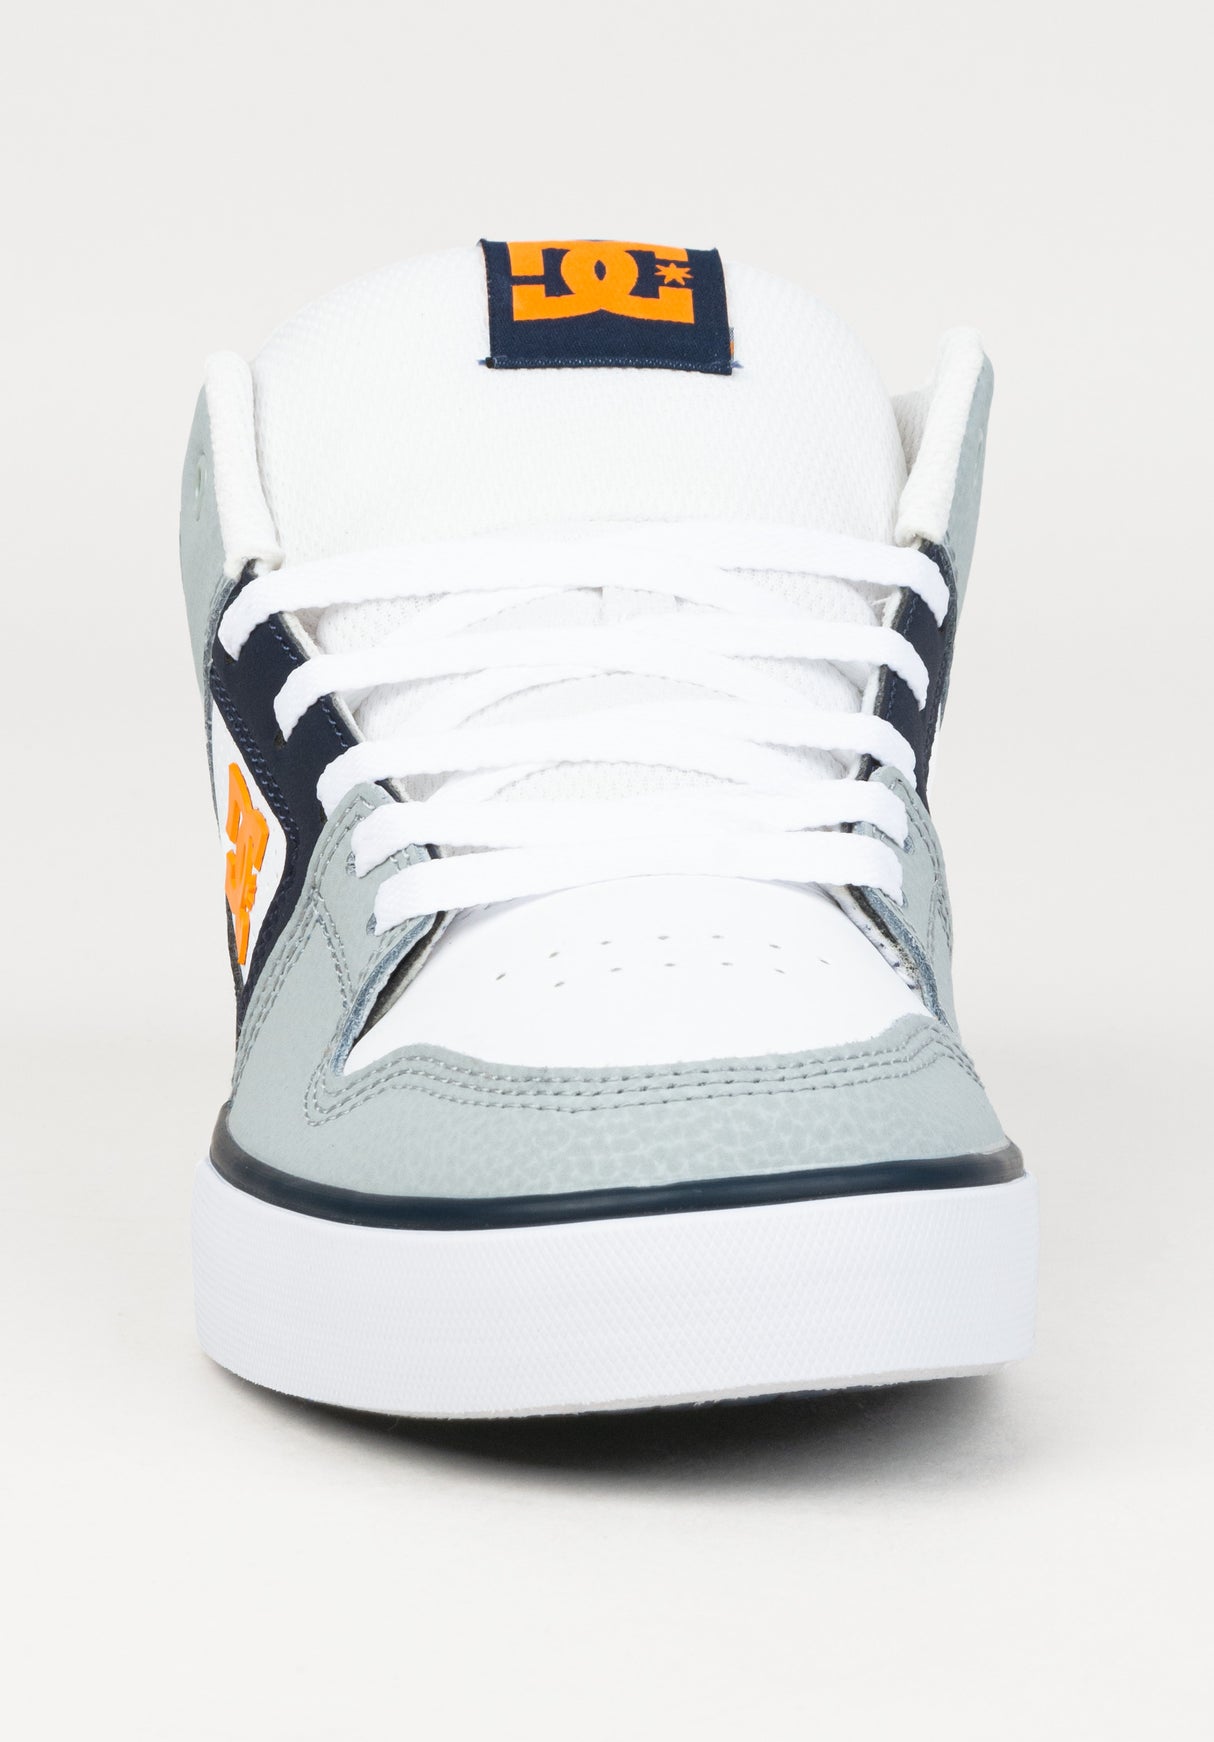 DC Shoes PURE Grey / White / Orange - Free delivery